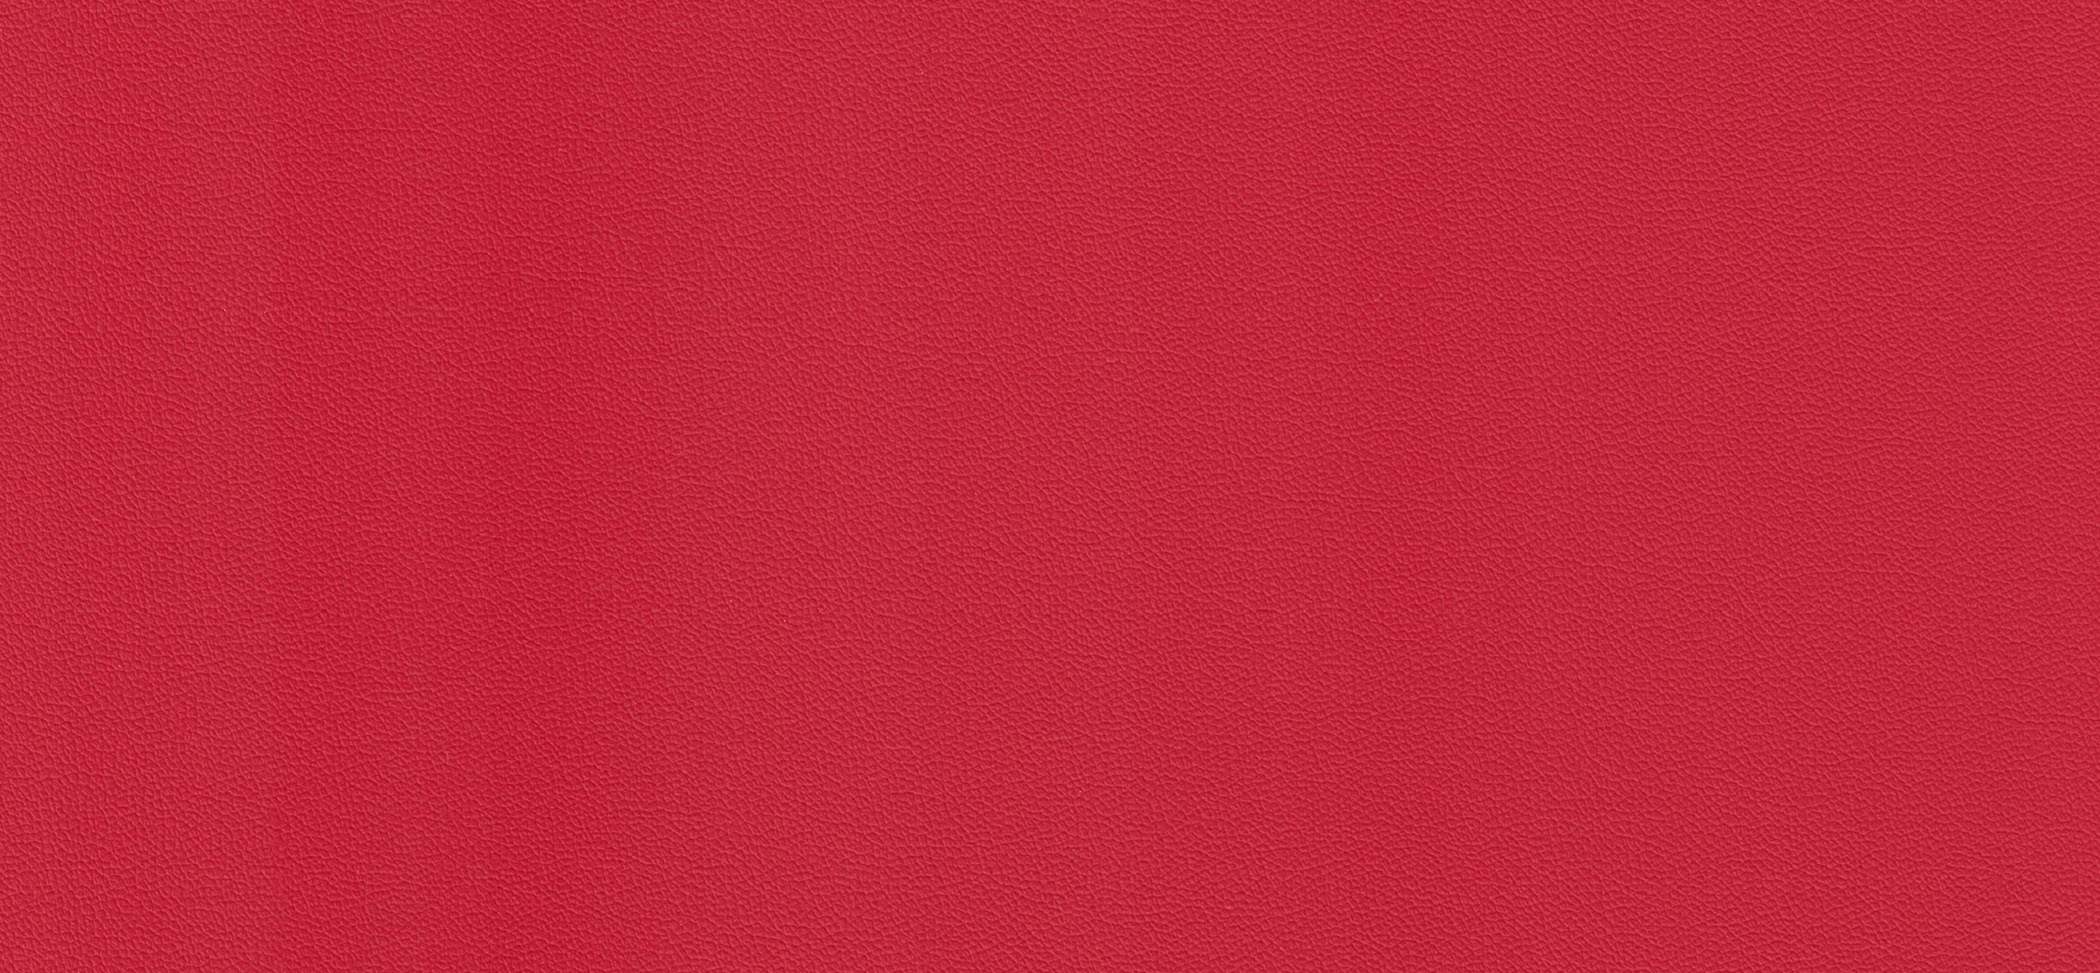 Cleanness red